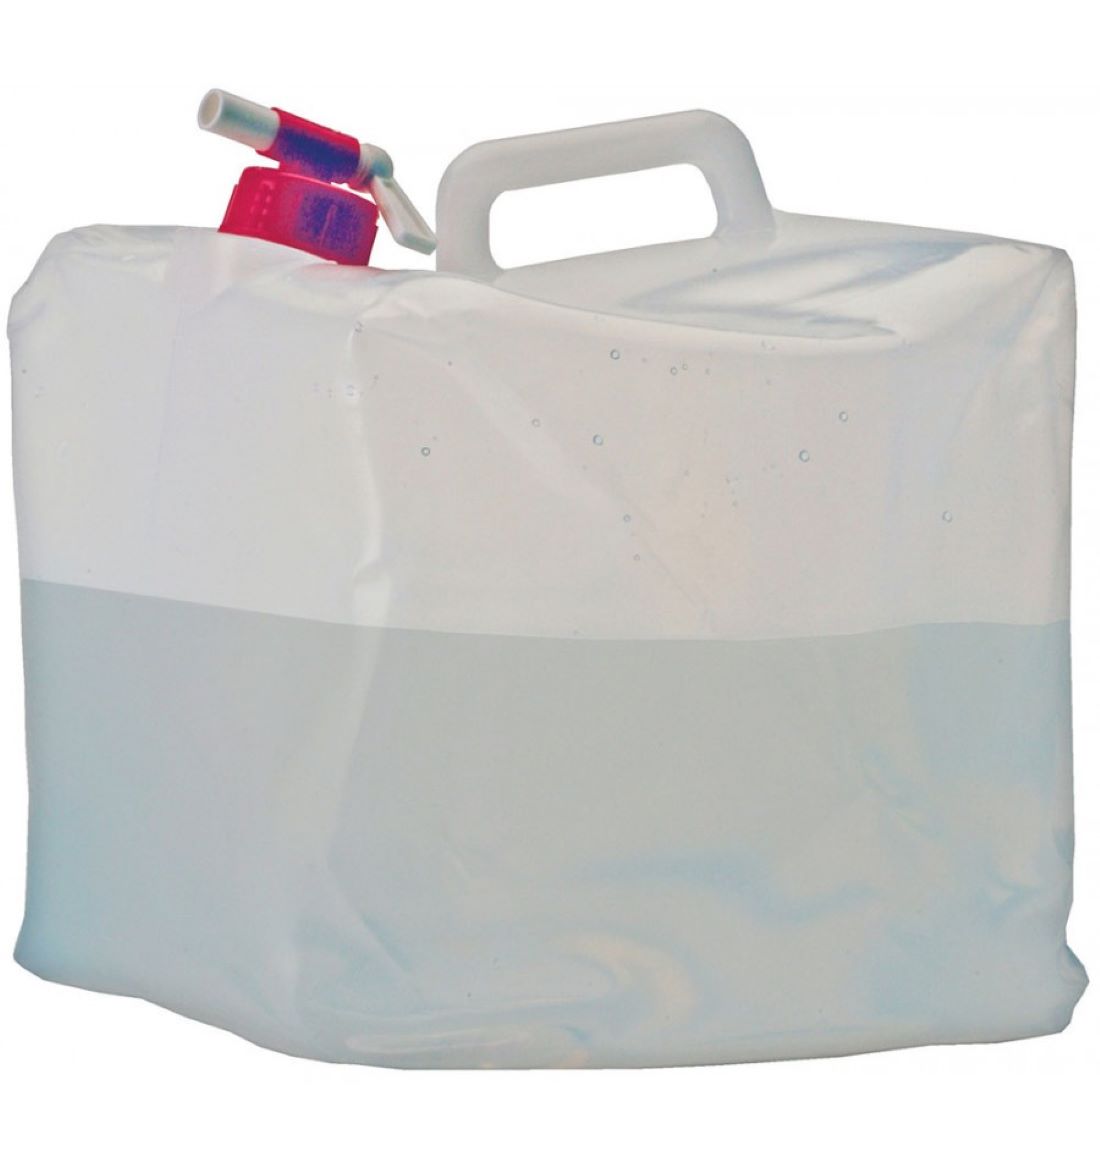 Vango Square Water Carrier – 15 litre